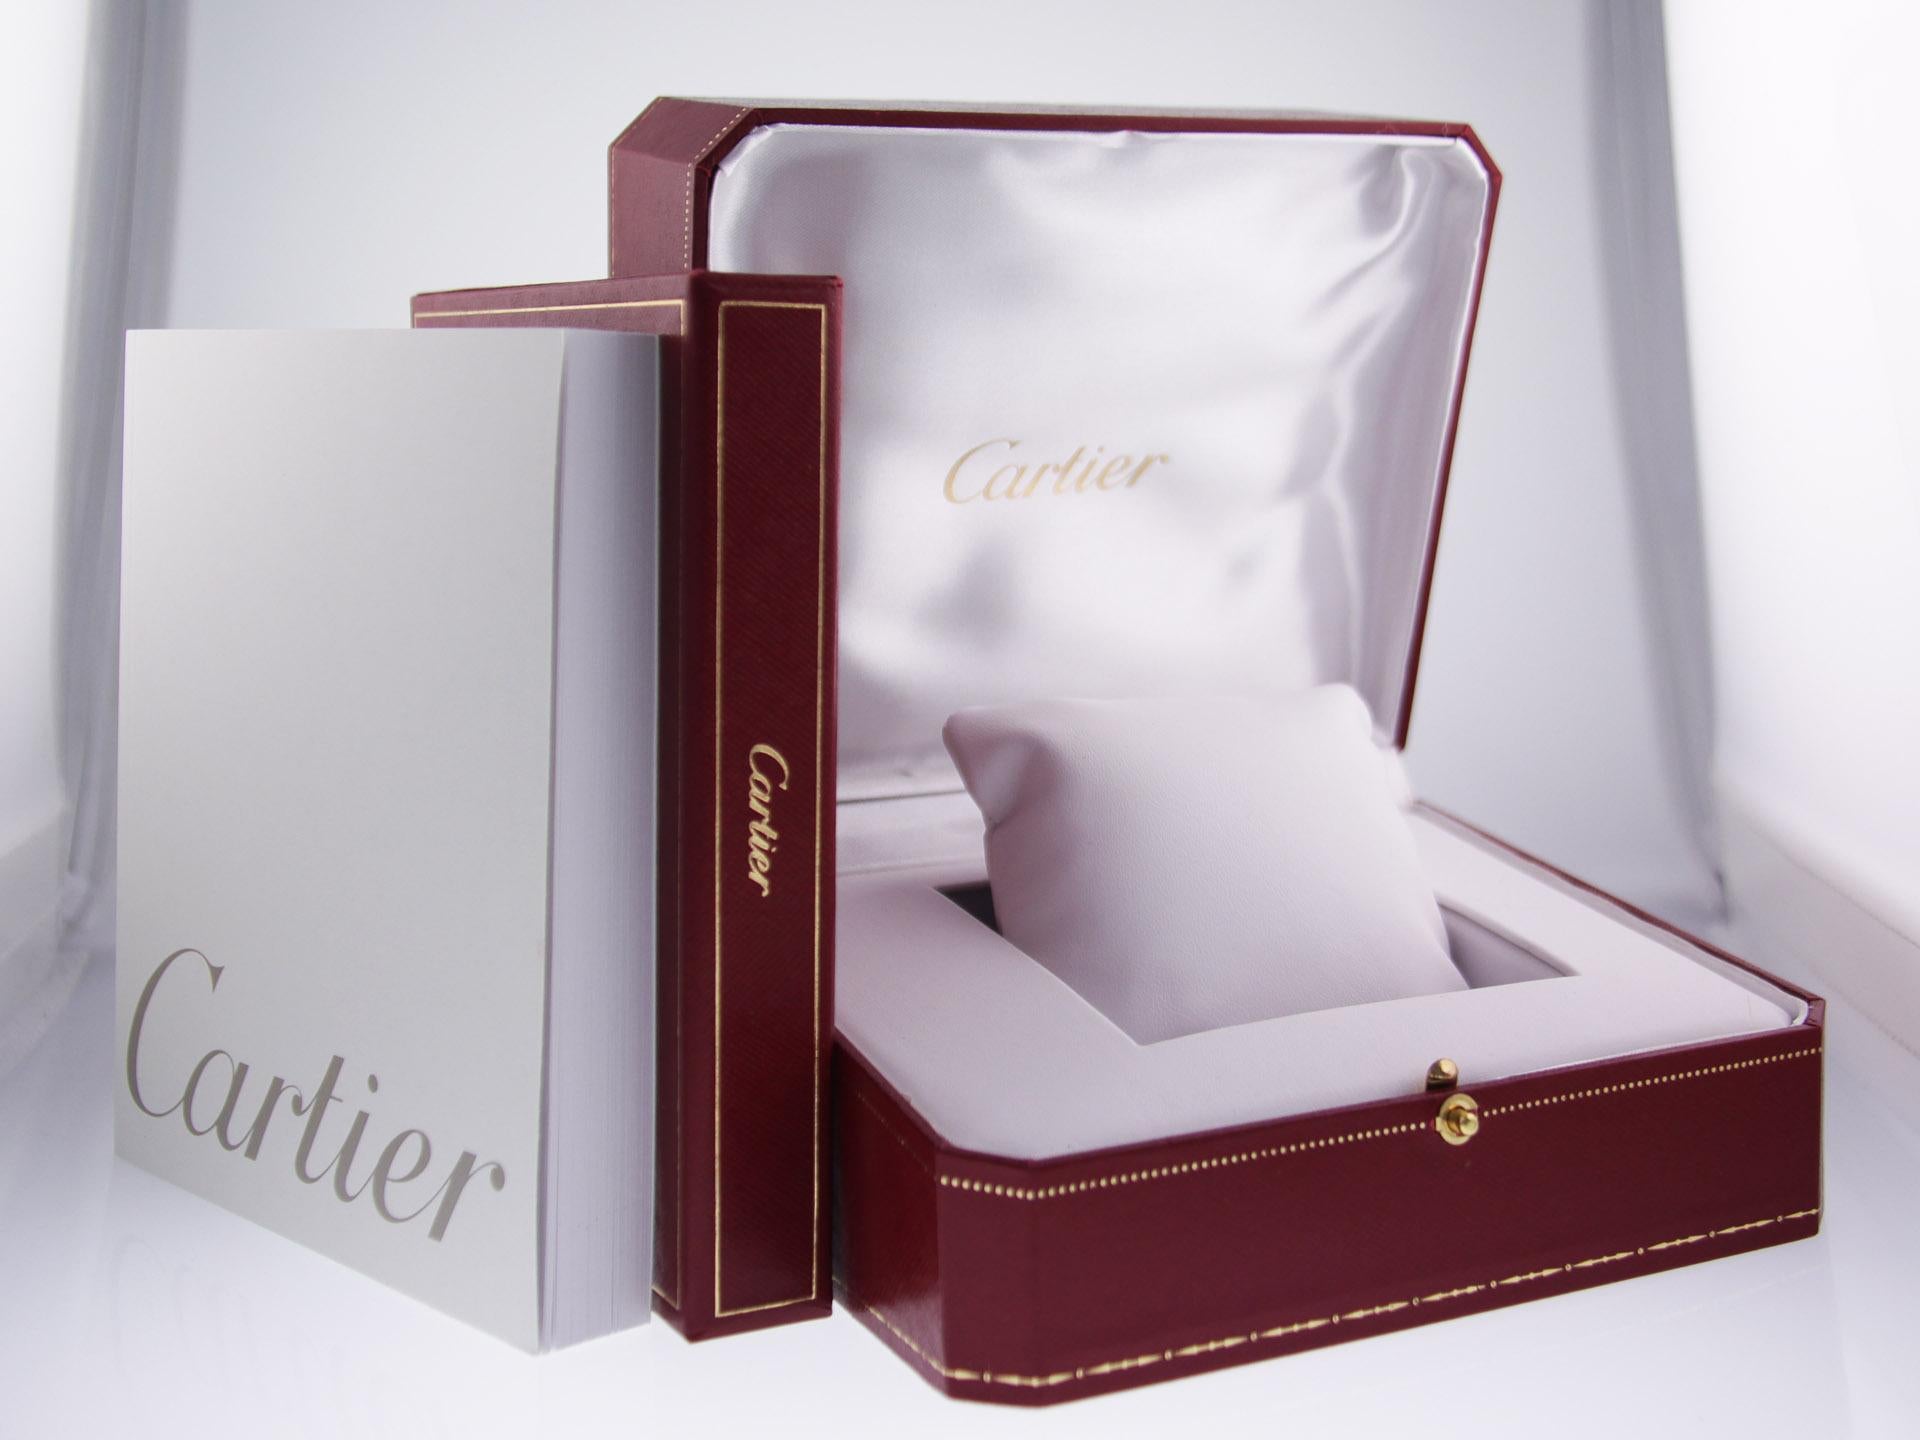 Brand:	Cartier	
Movement:	Automatic, Cartier Calibre 076
Series:	Tank Anglaise	
Functions:	Hour, Minute
Model #:	WT100025	
Gender:	Ladies'	
Condition:	Excellent Display Model, Faint Scratches on Bezel, Case & Bracelet	
Dial Markers:	Silver Dial w/